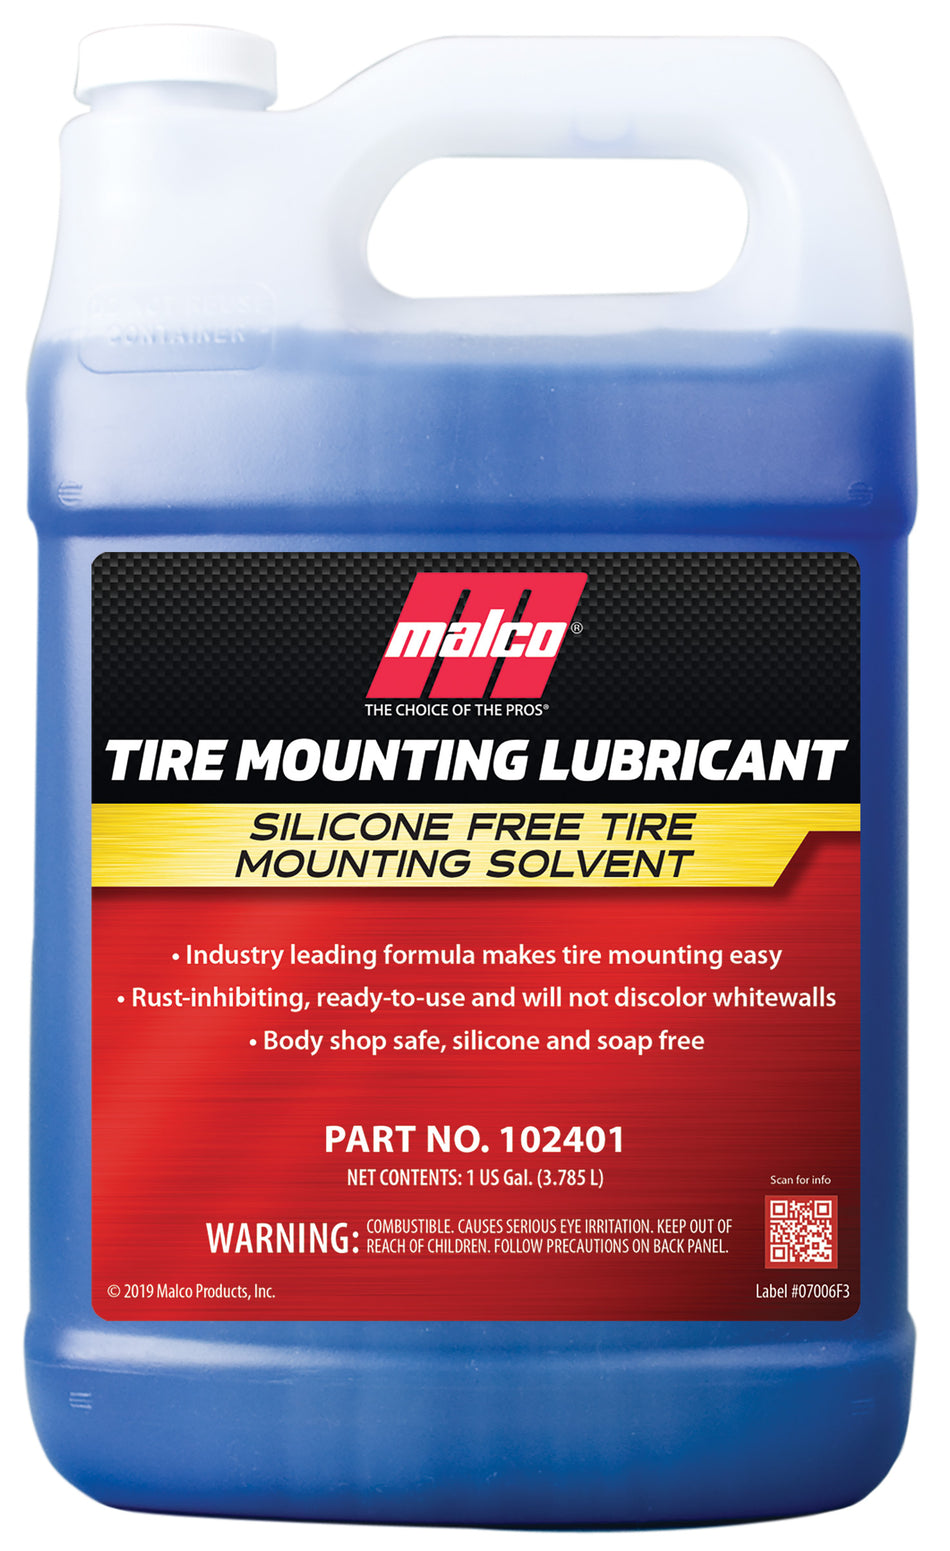 Malco Tire Mounting Lubricant